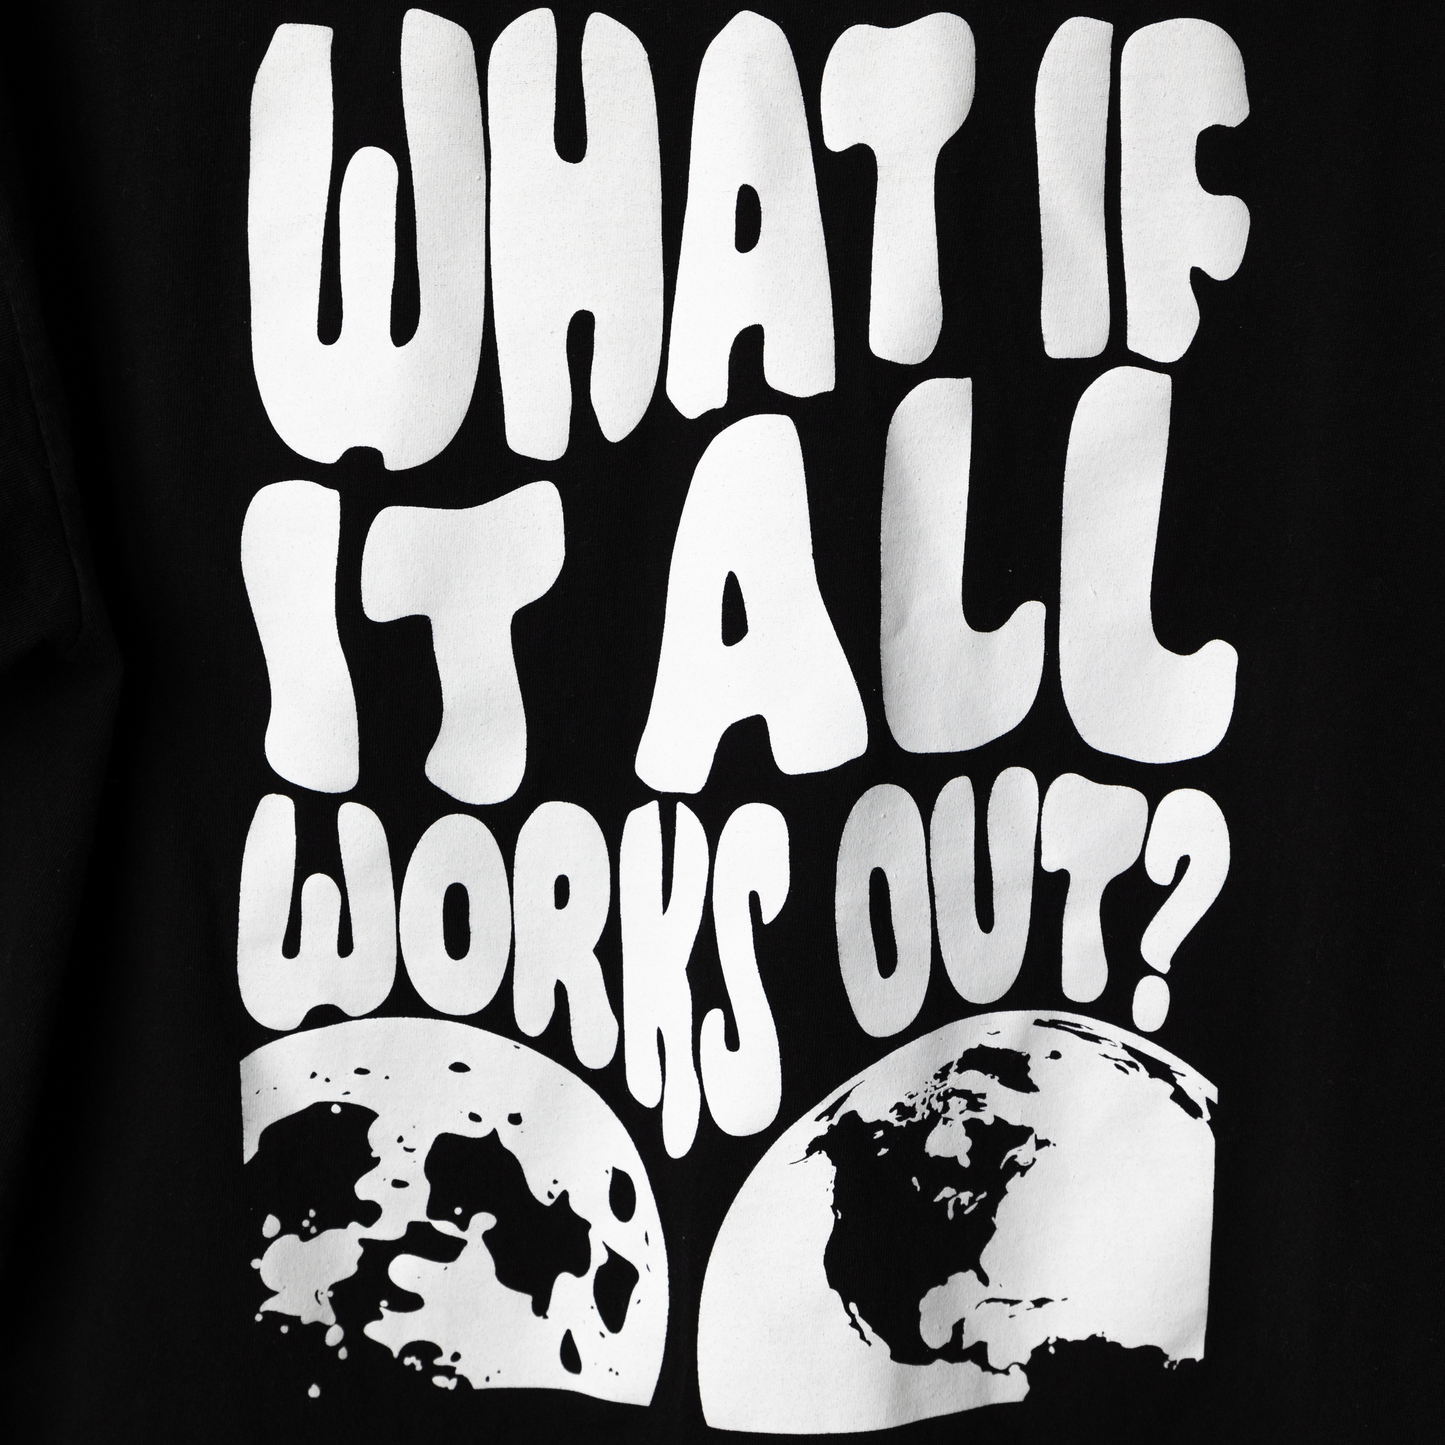 OVERSIZED 'WHAT IF' TEE - BLACK & WHITE